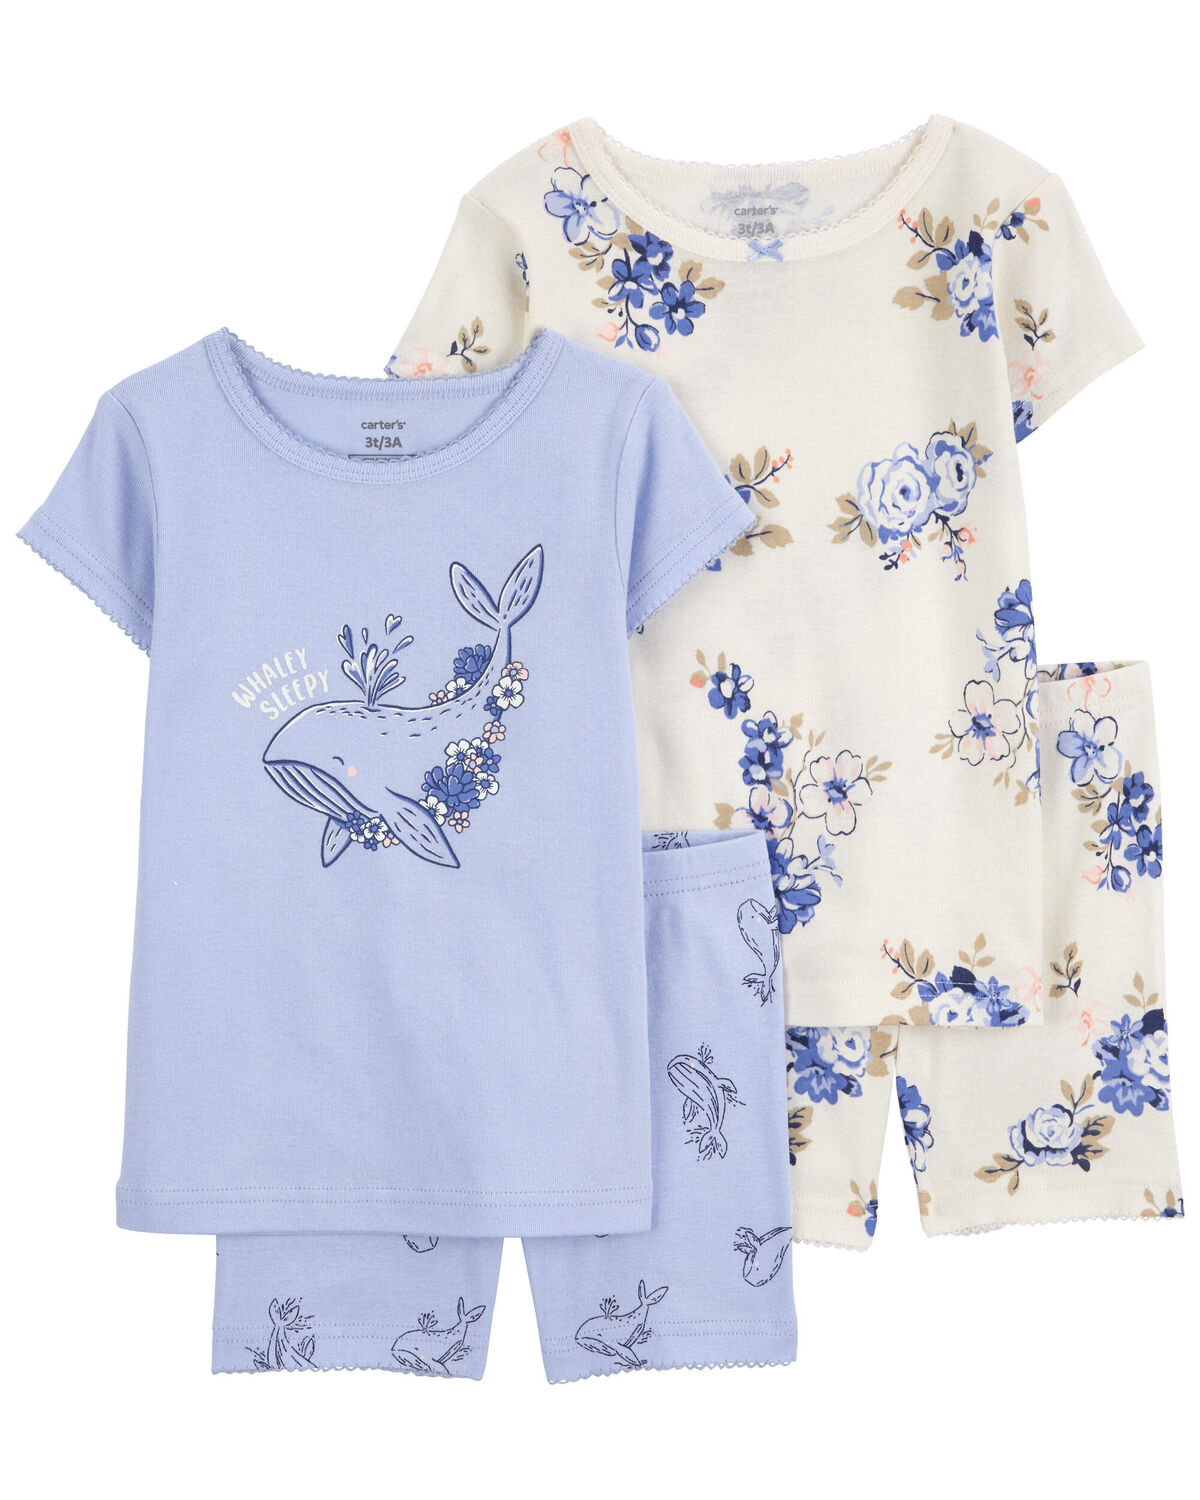 Toddler 2-Pack Floral & Whale-Print Pajamas Sets